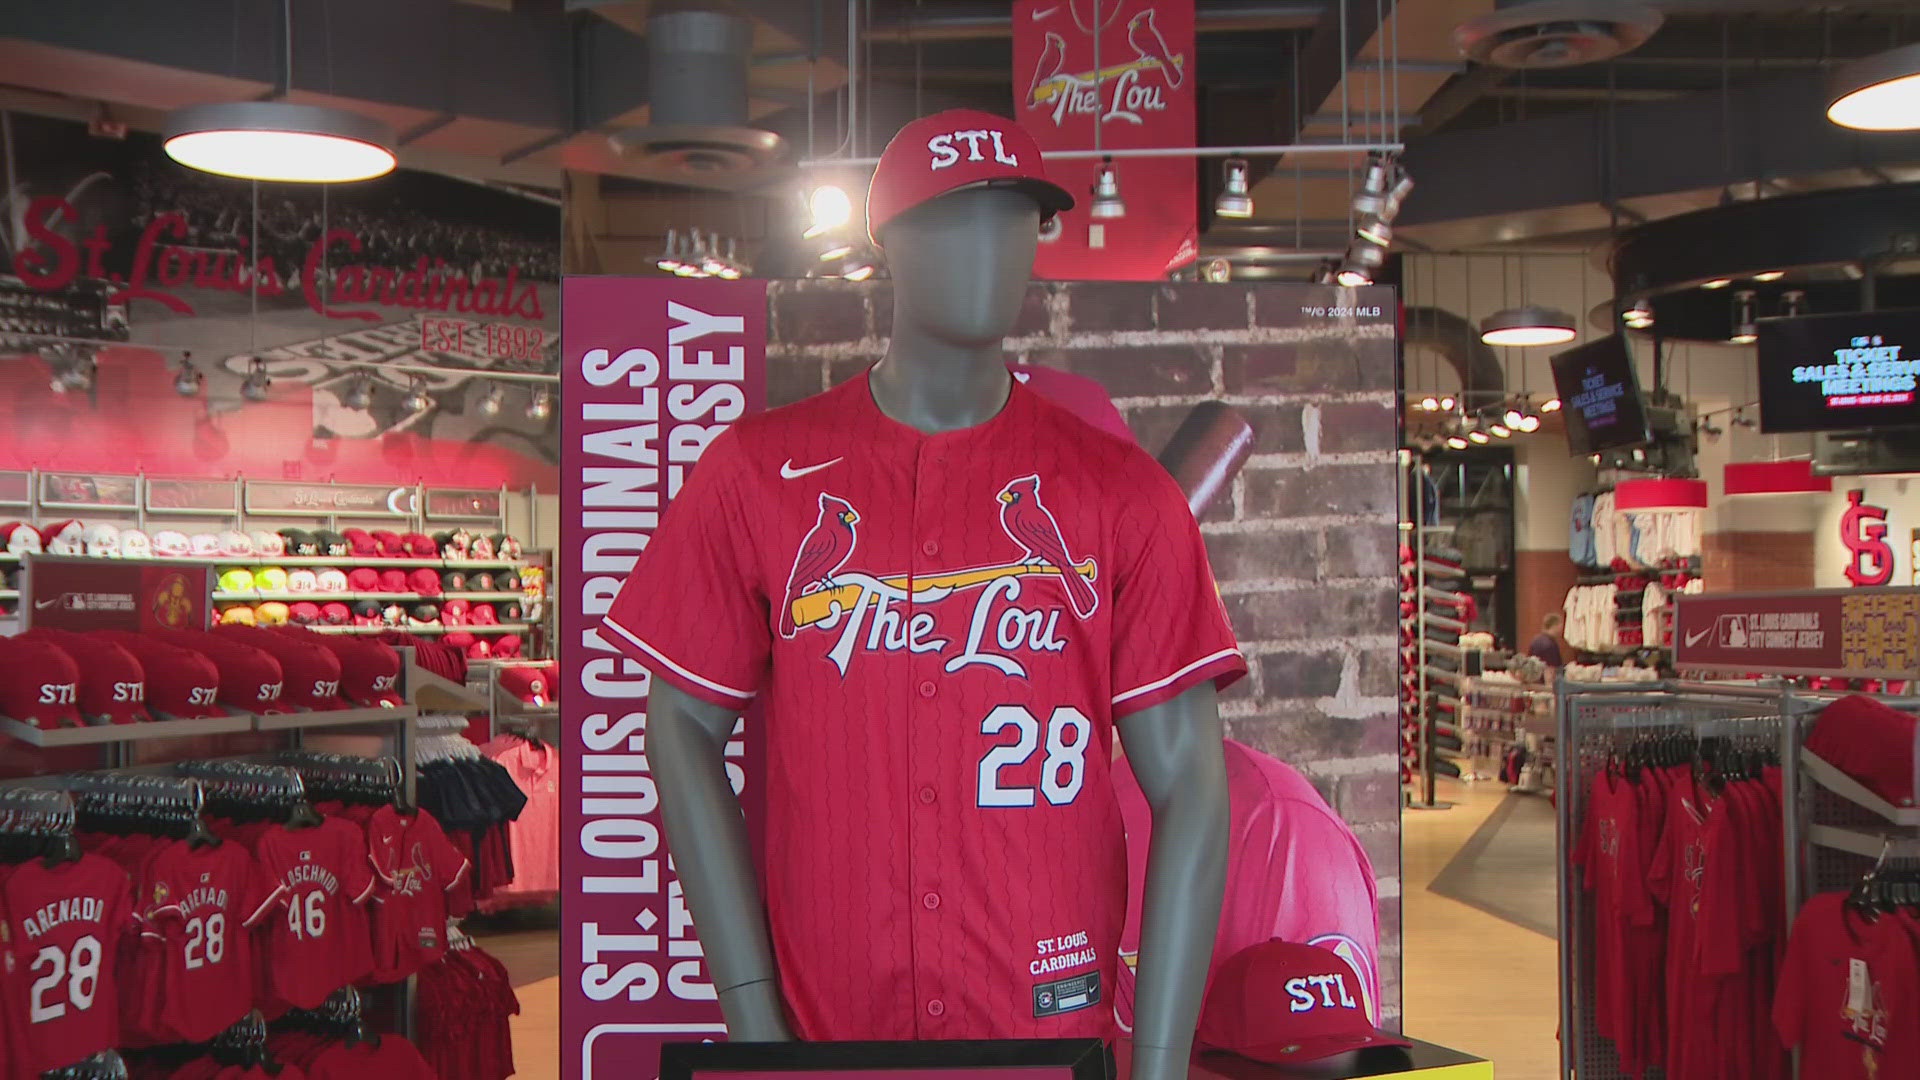 The St. Louis Cardinals unveiled a new alternate jersey Monday that breaks from tradition while celebrating the history of the team and the city.